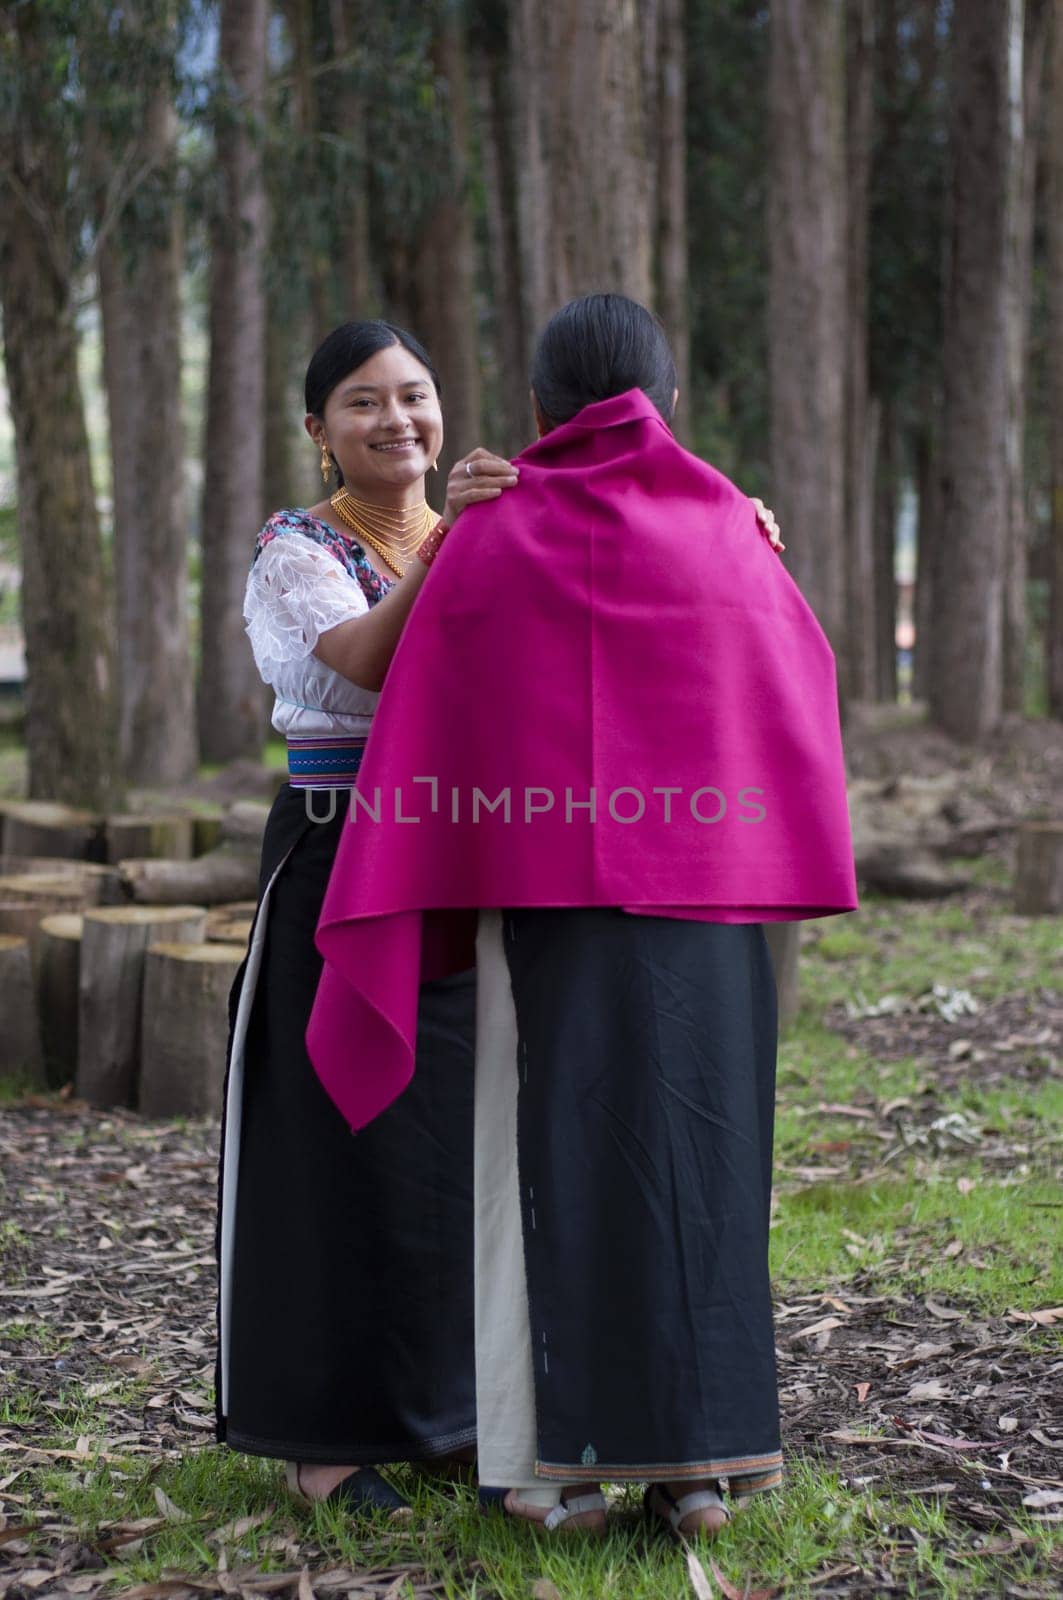 smiling indigenous girl putting a fuchsia cloak on another indigenous woman for a ritual in the forest by Raulmartin